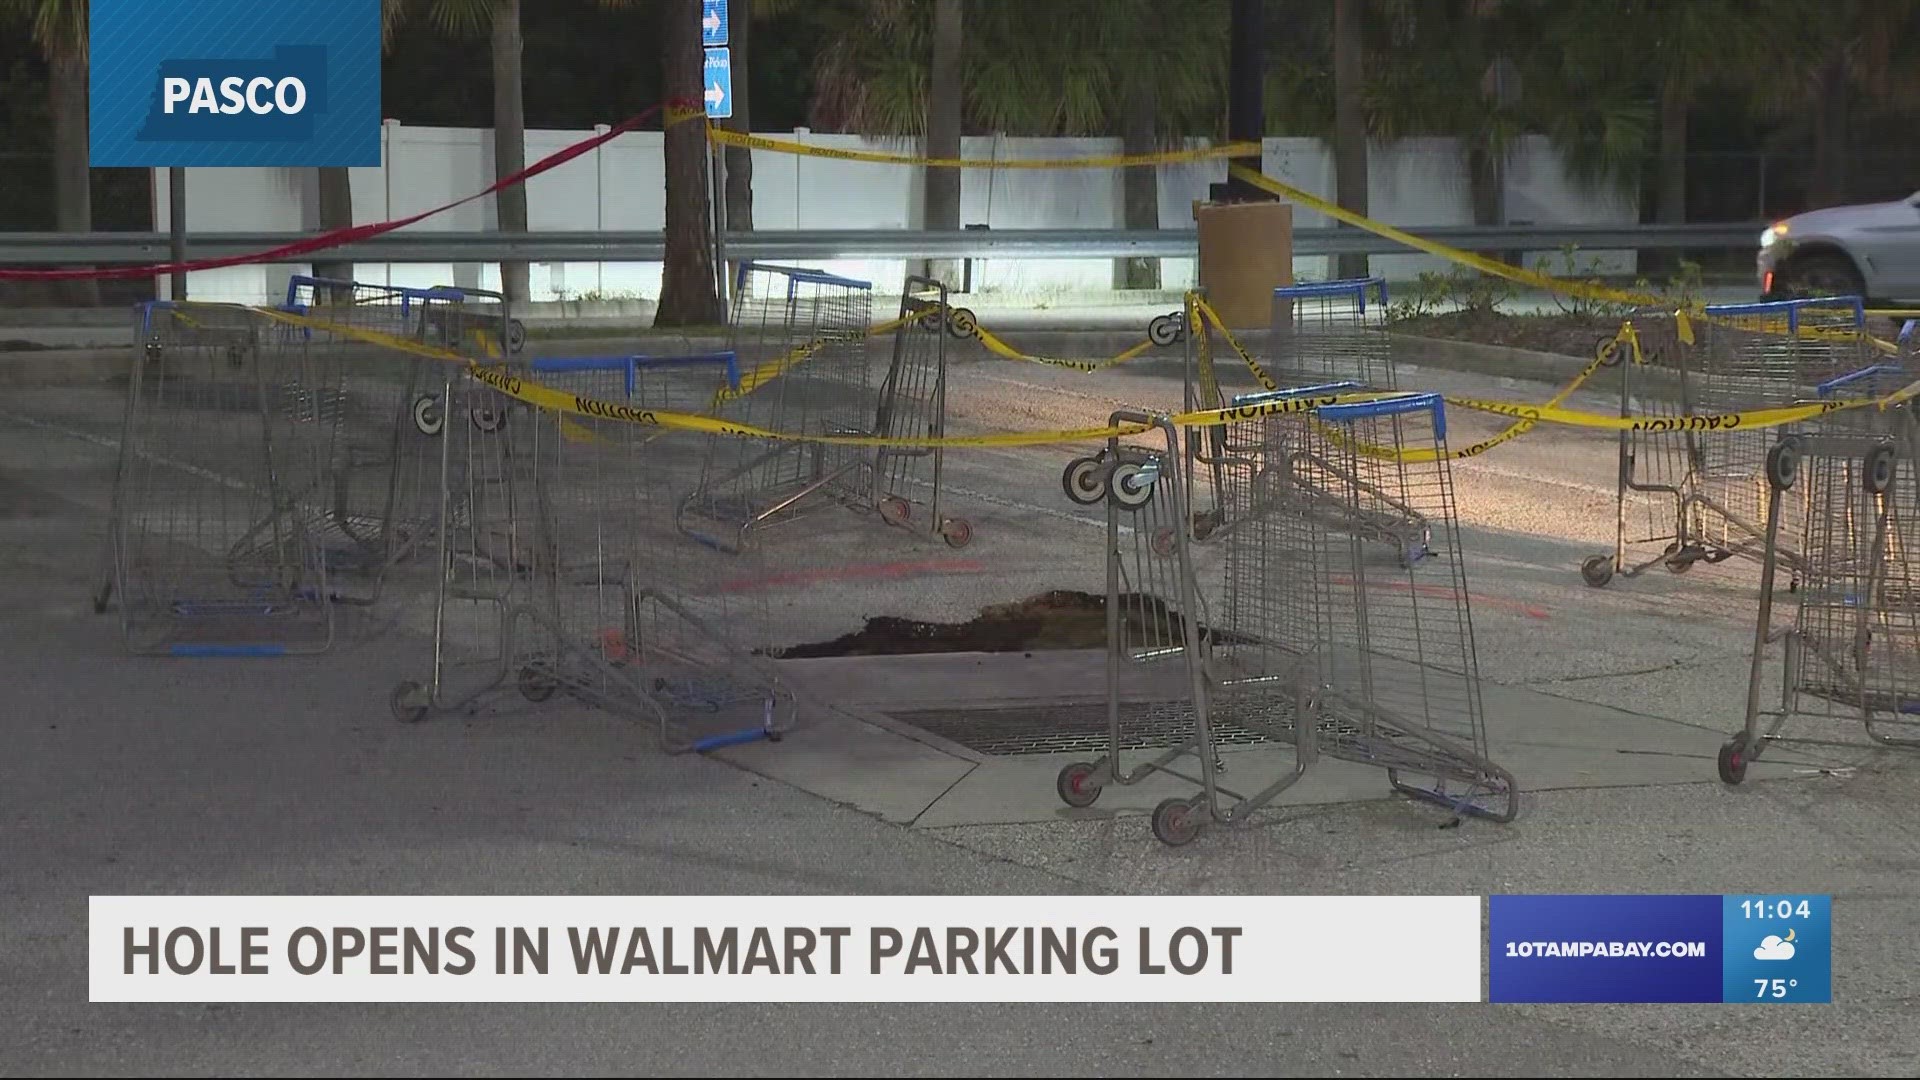 There were no reported injuries to shoppers or people nearby.